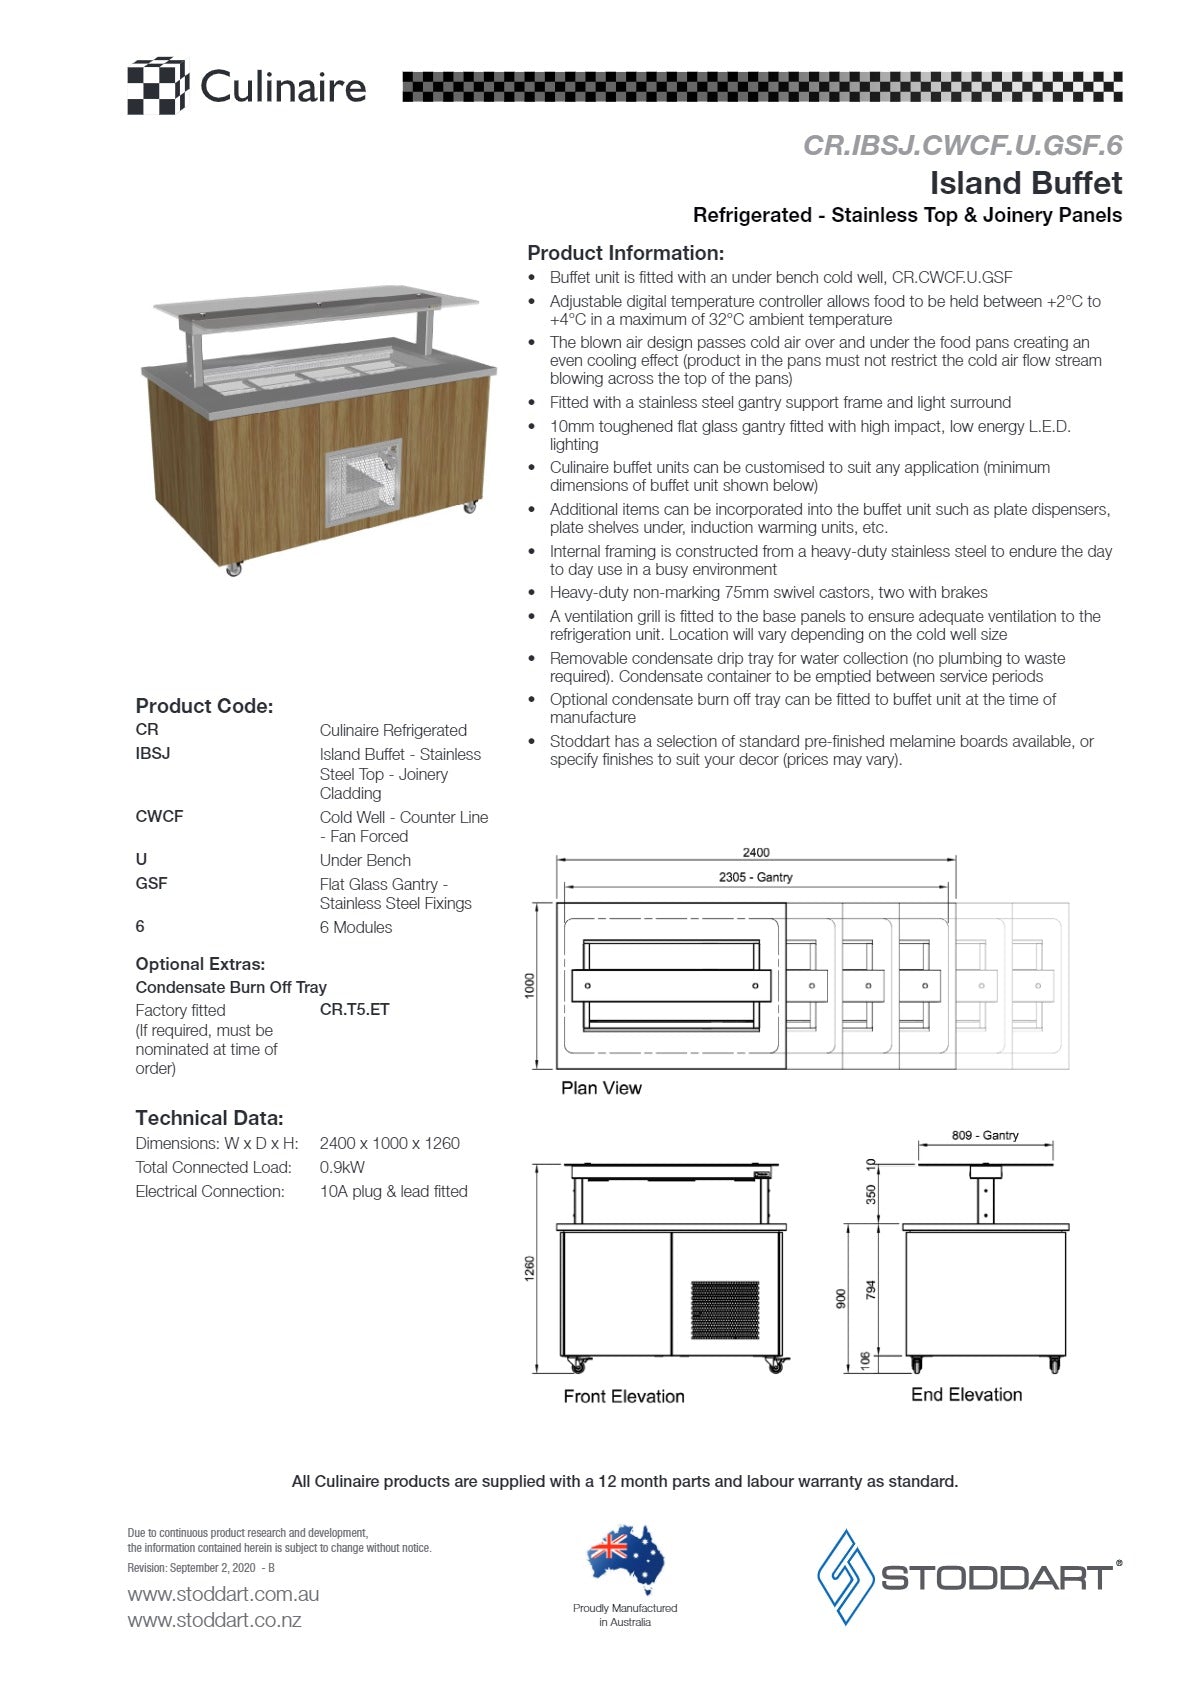 Thumbnail - Culinaire CR.IBSJ.CWCF.U.GSF.6 - Mobile Refrigerated Island Buffet With Flat Glass Gantry